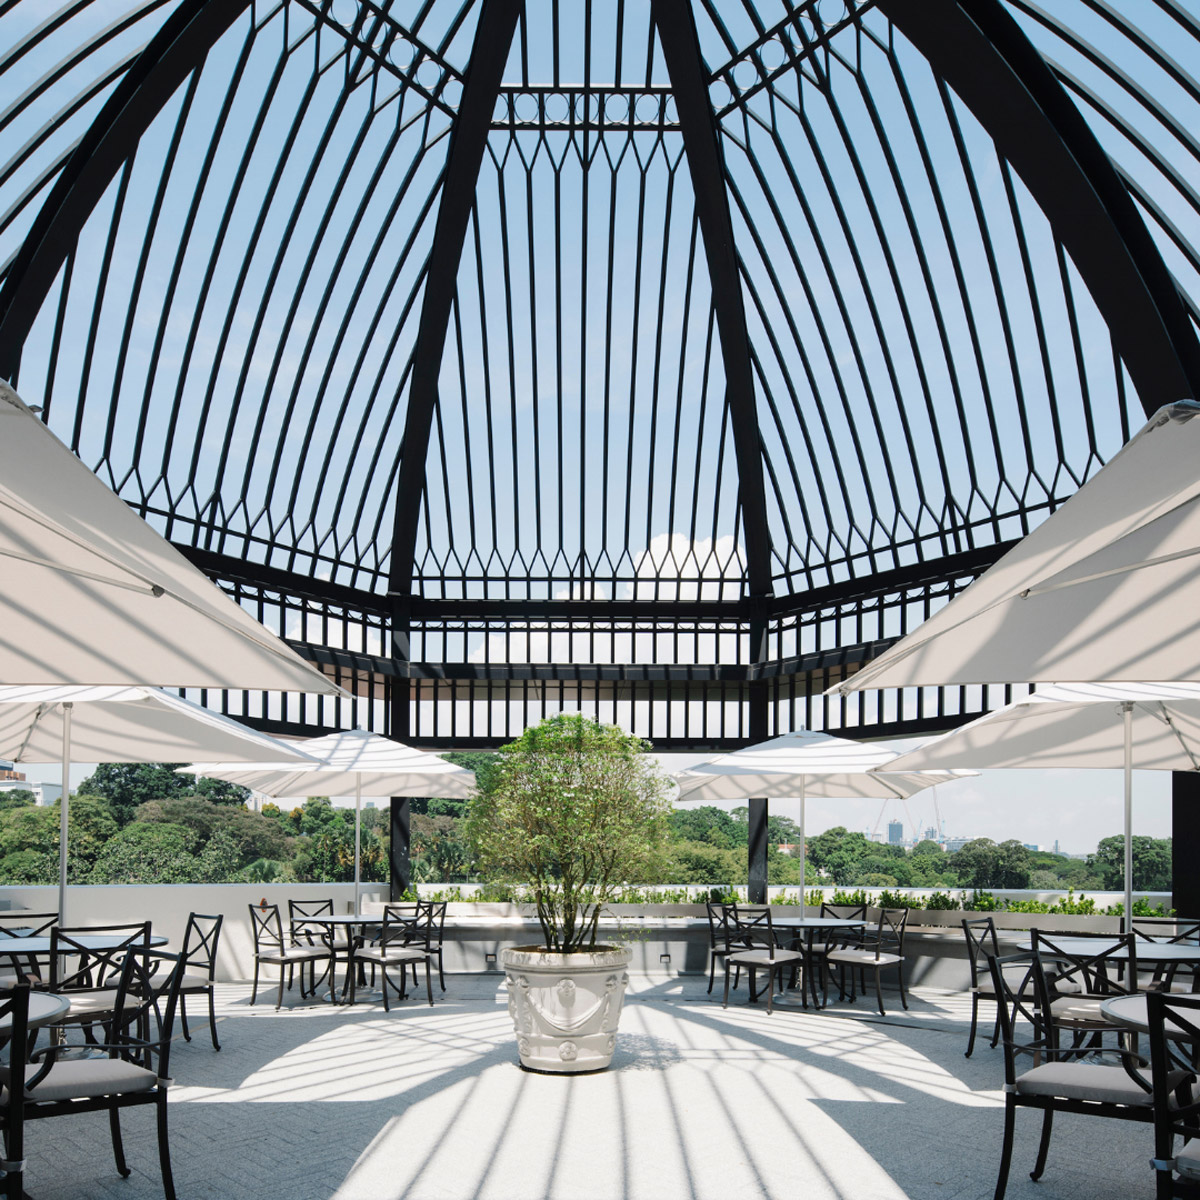 Grand Park City Hall: This Sky-High Rooftop Venue Lets You Say I Do in the Clouds